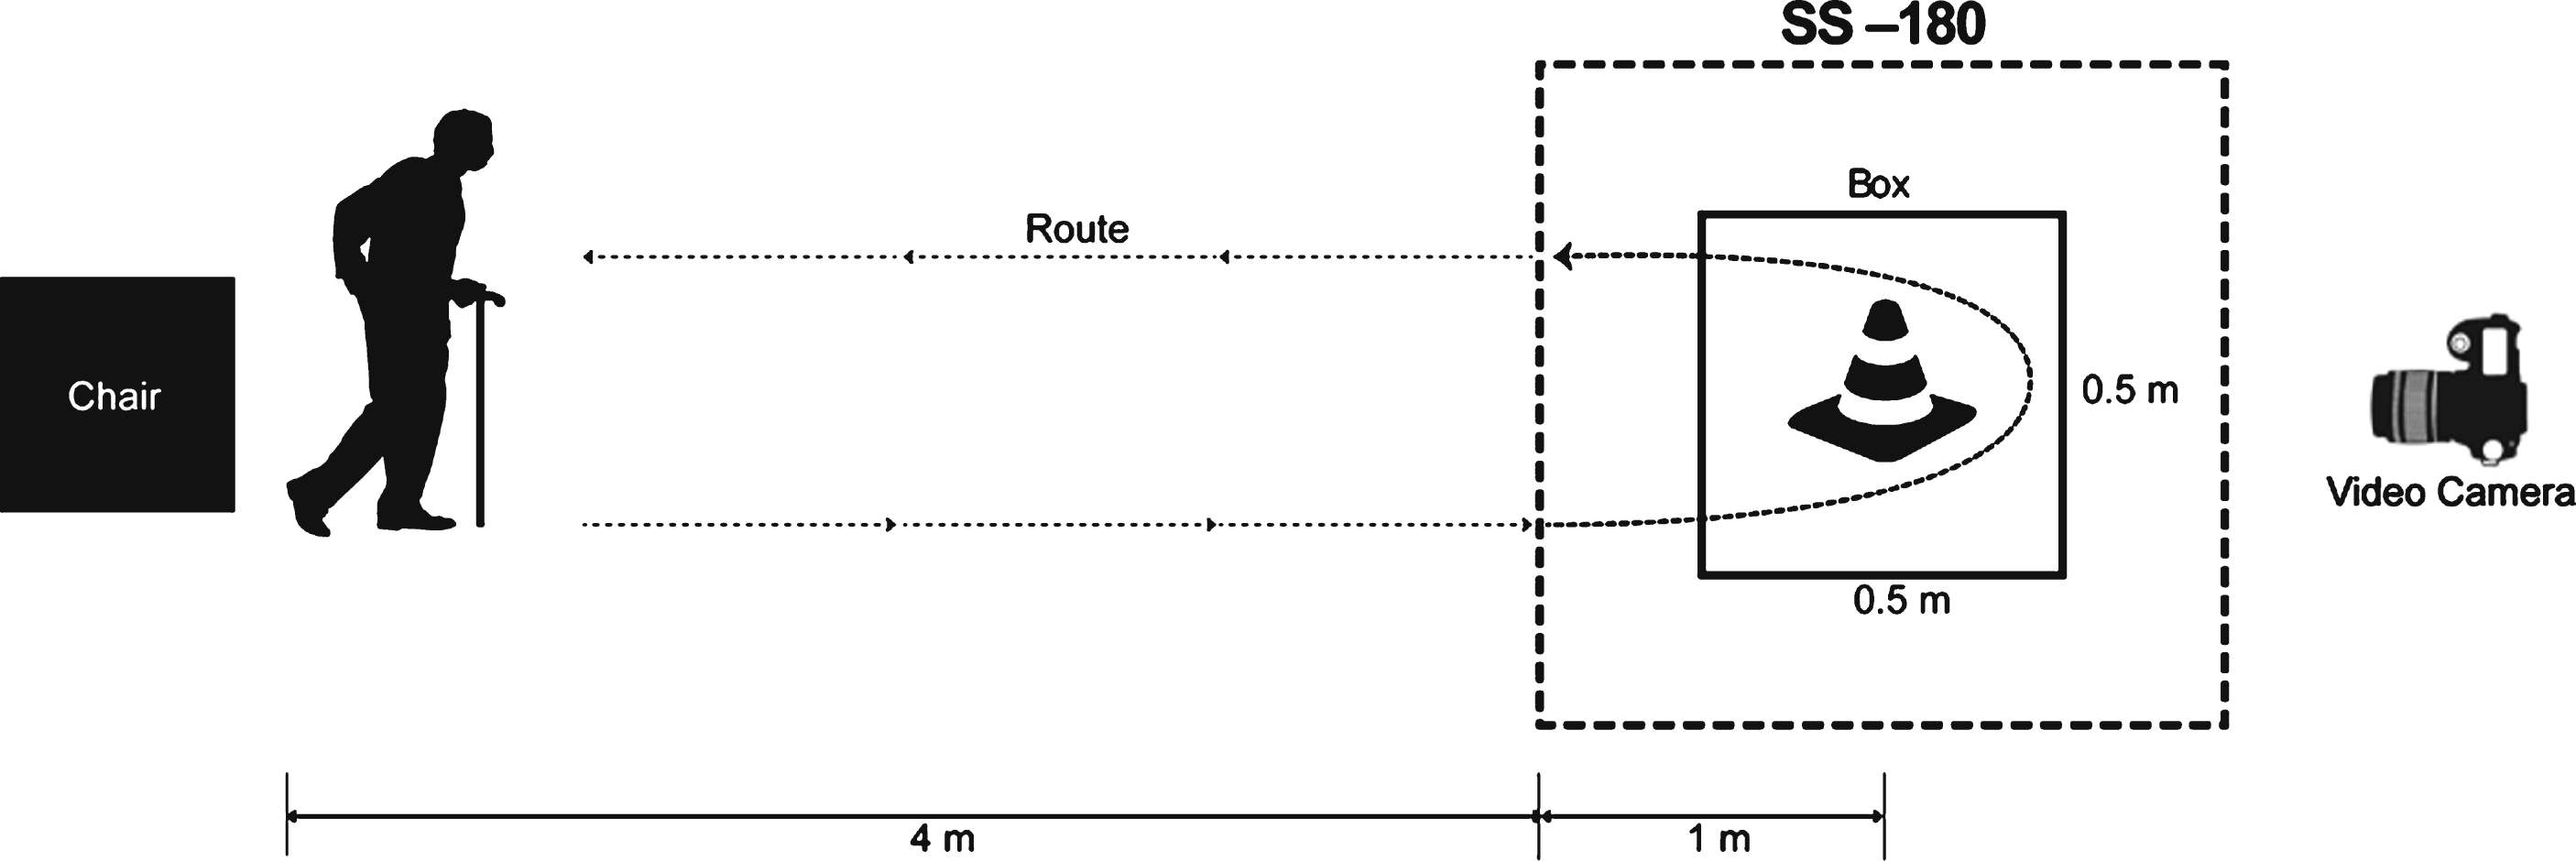 Schematic drawing of the standard Timed Up and Go (TUG) task and the modified Standing Start 180° Turn Test (SS-180). The participants walk for a distance of five meters from a sitting position and come back to the chair after turning 180° around a traffic cone in a 0.5 m × 0.5 m target box. The time and number of steps during the 180° turn are measured from the point when the patient is one meter from the cone. The whole process is recorded by a video camera.